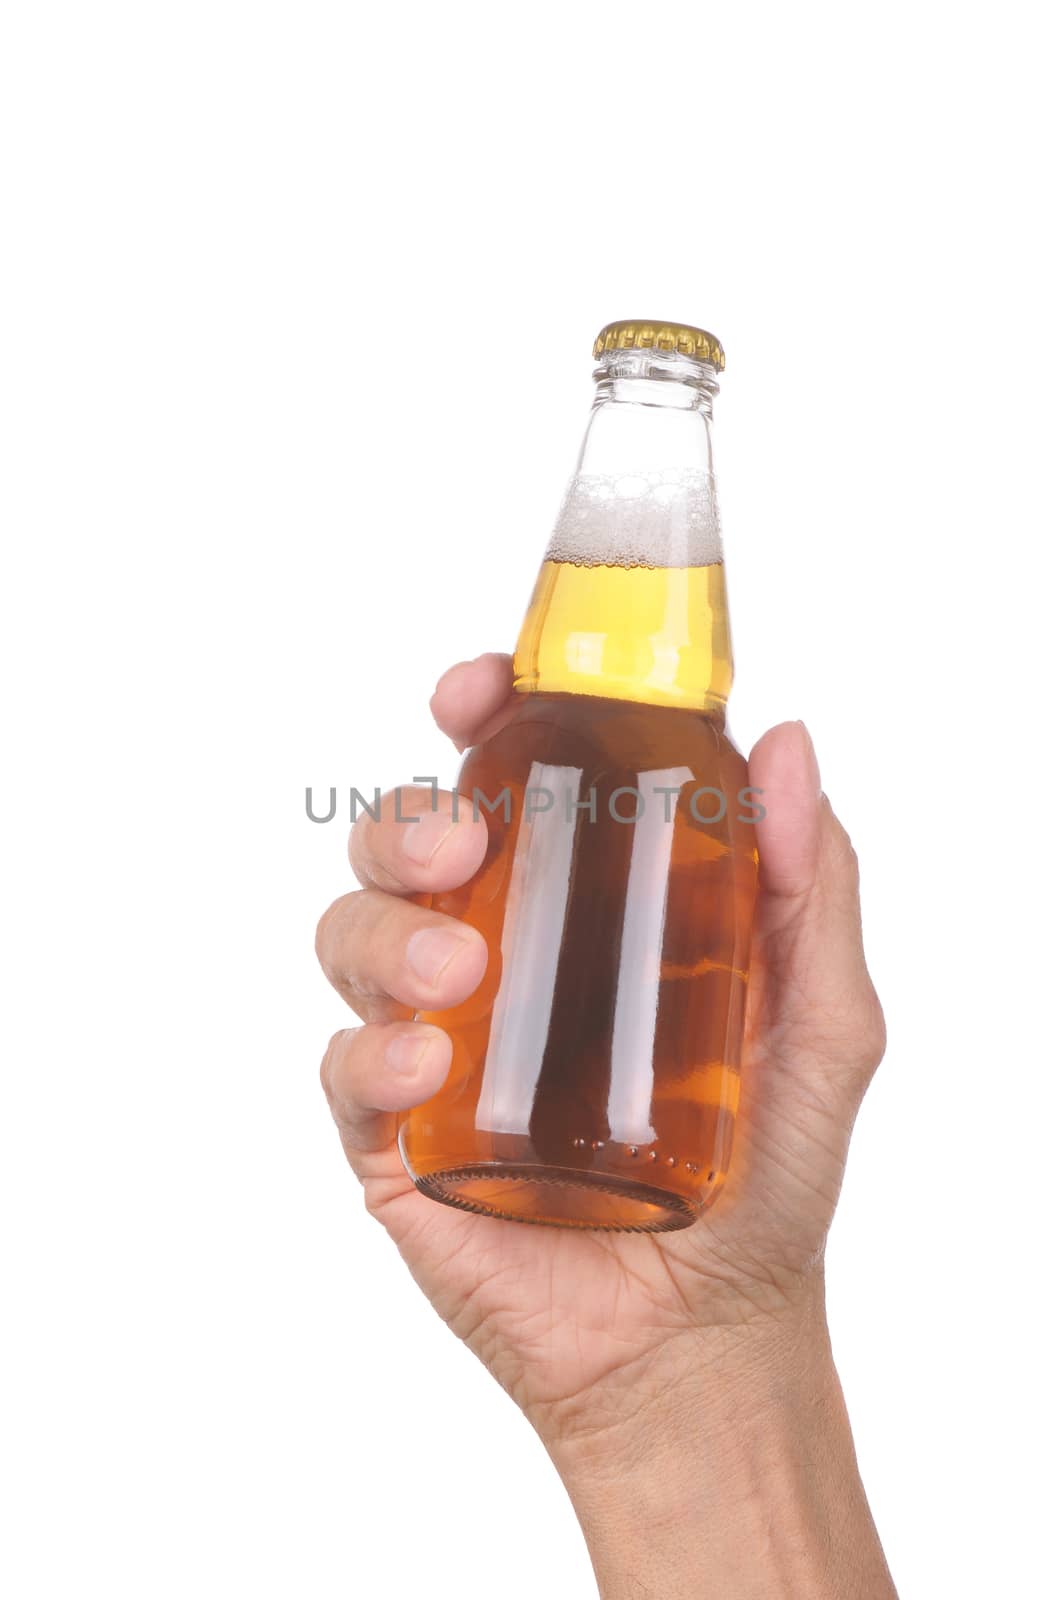 Man's hand holding up a clear beer bottle without label over a white background vertical format